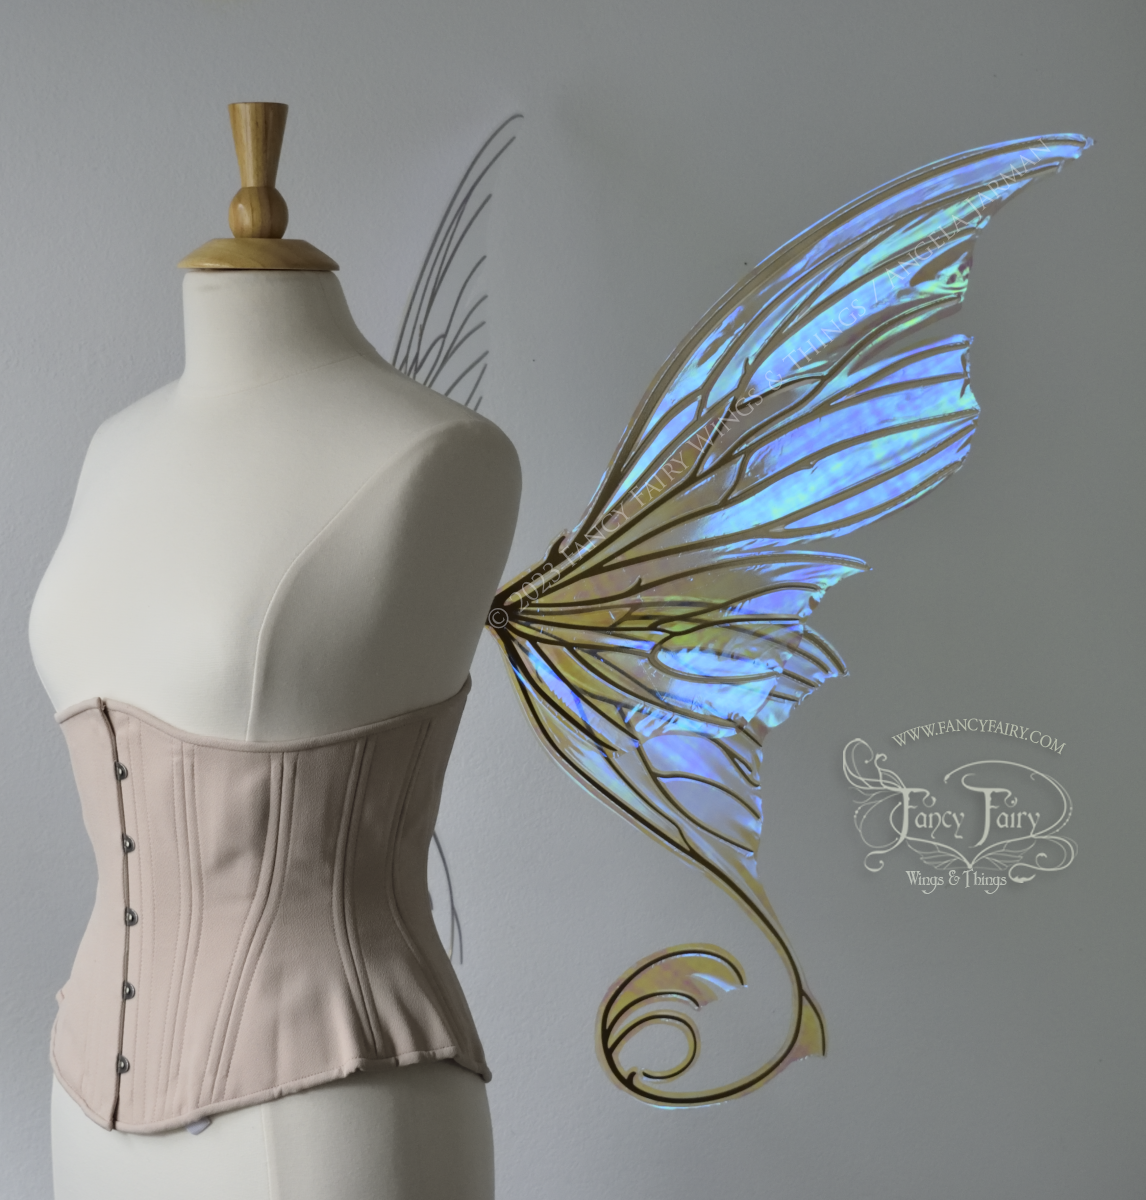 Right side view of a dress form wearing an underbust corset & large blue iridescent fairy wings with lots of intricate veins, some have 'thorns'. Upper panels curve slightly downwards along top edge with pointy tips, bottom panels have tails